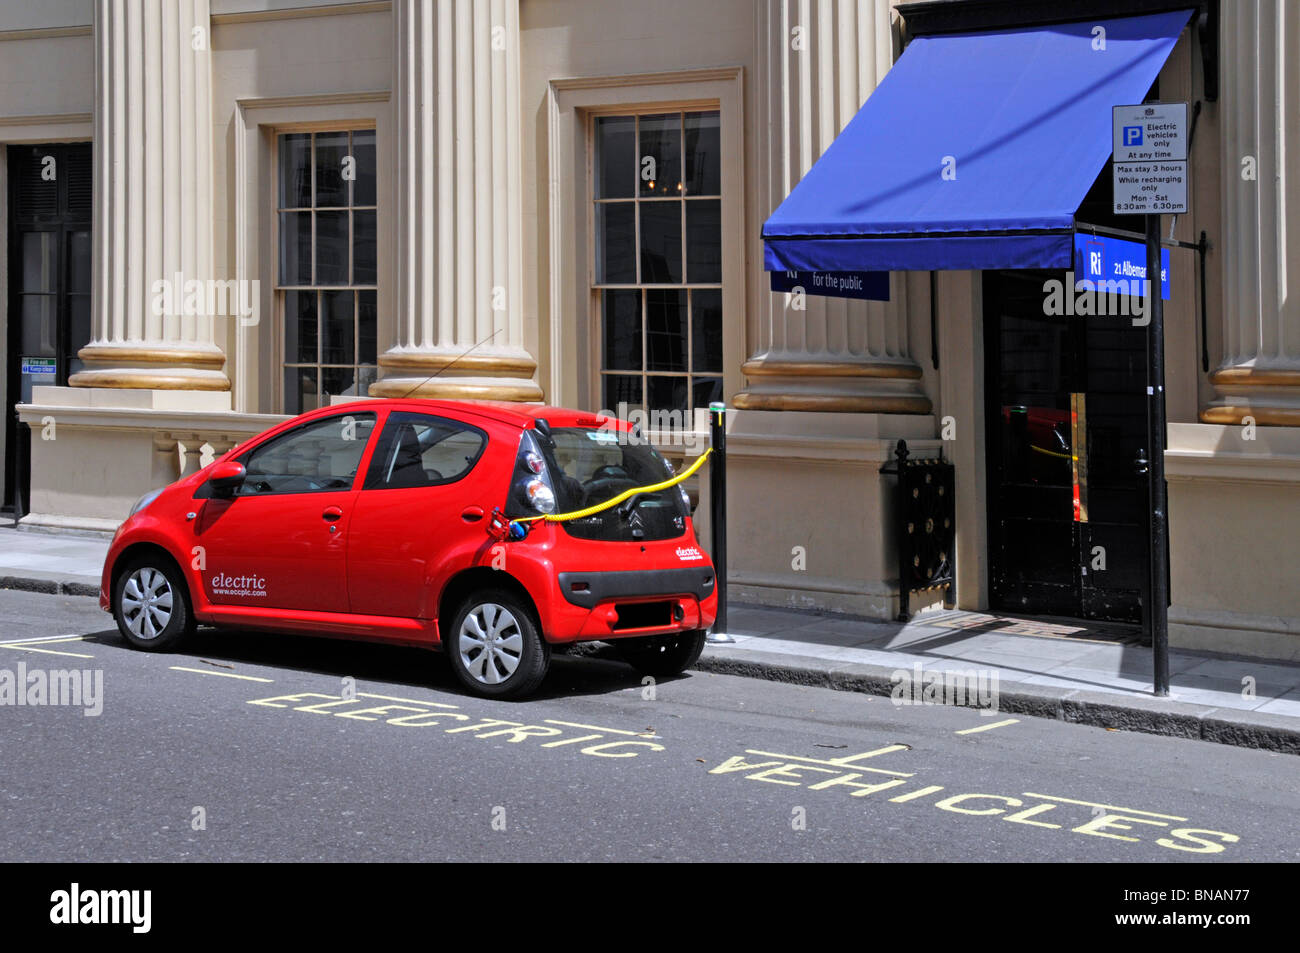 Environment & climate change issues in London have resulted in dedicated vehicle bays for electric car use & low parking fees Westminster England UK Stock Photo